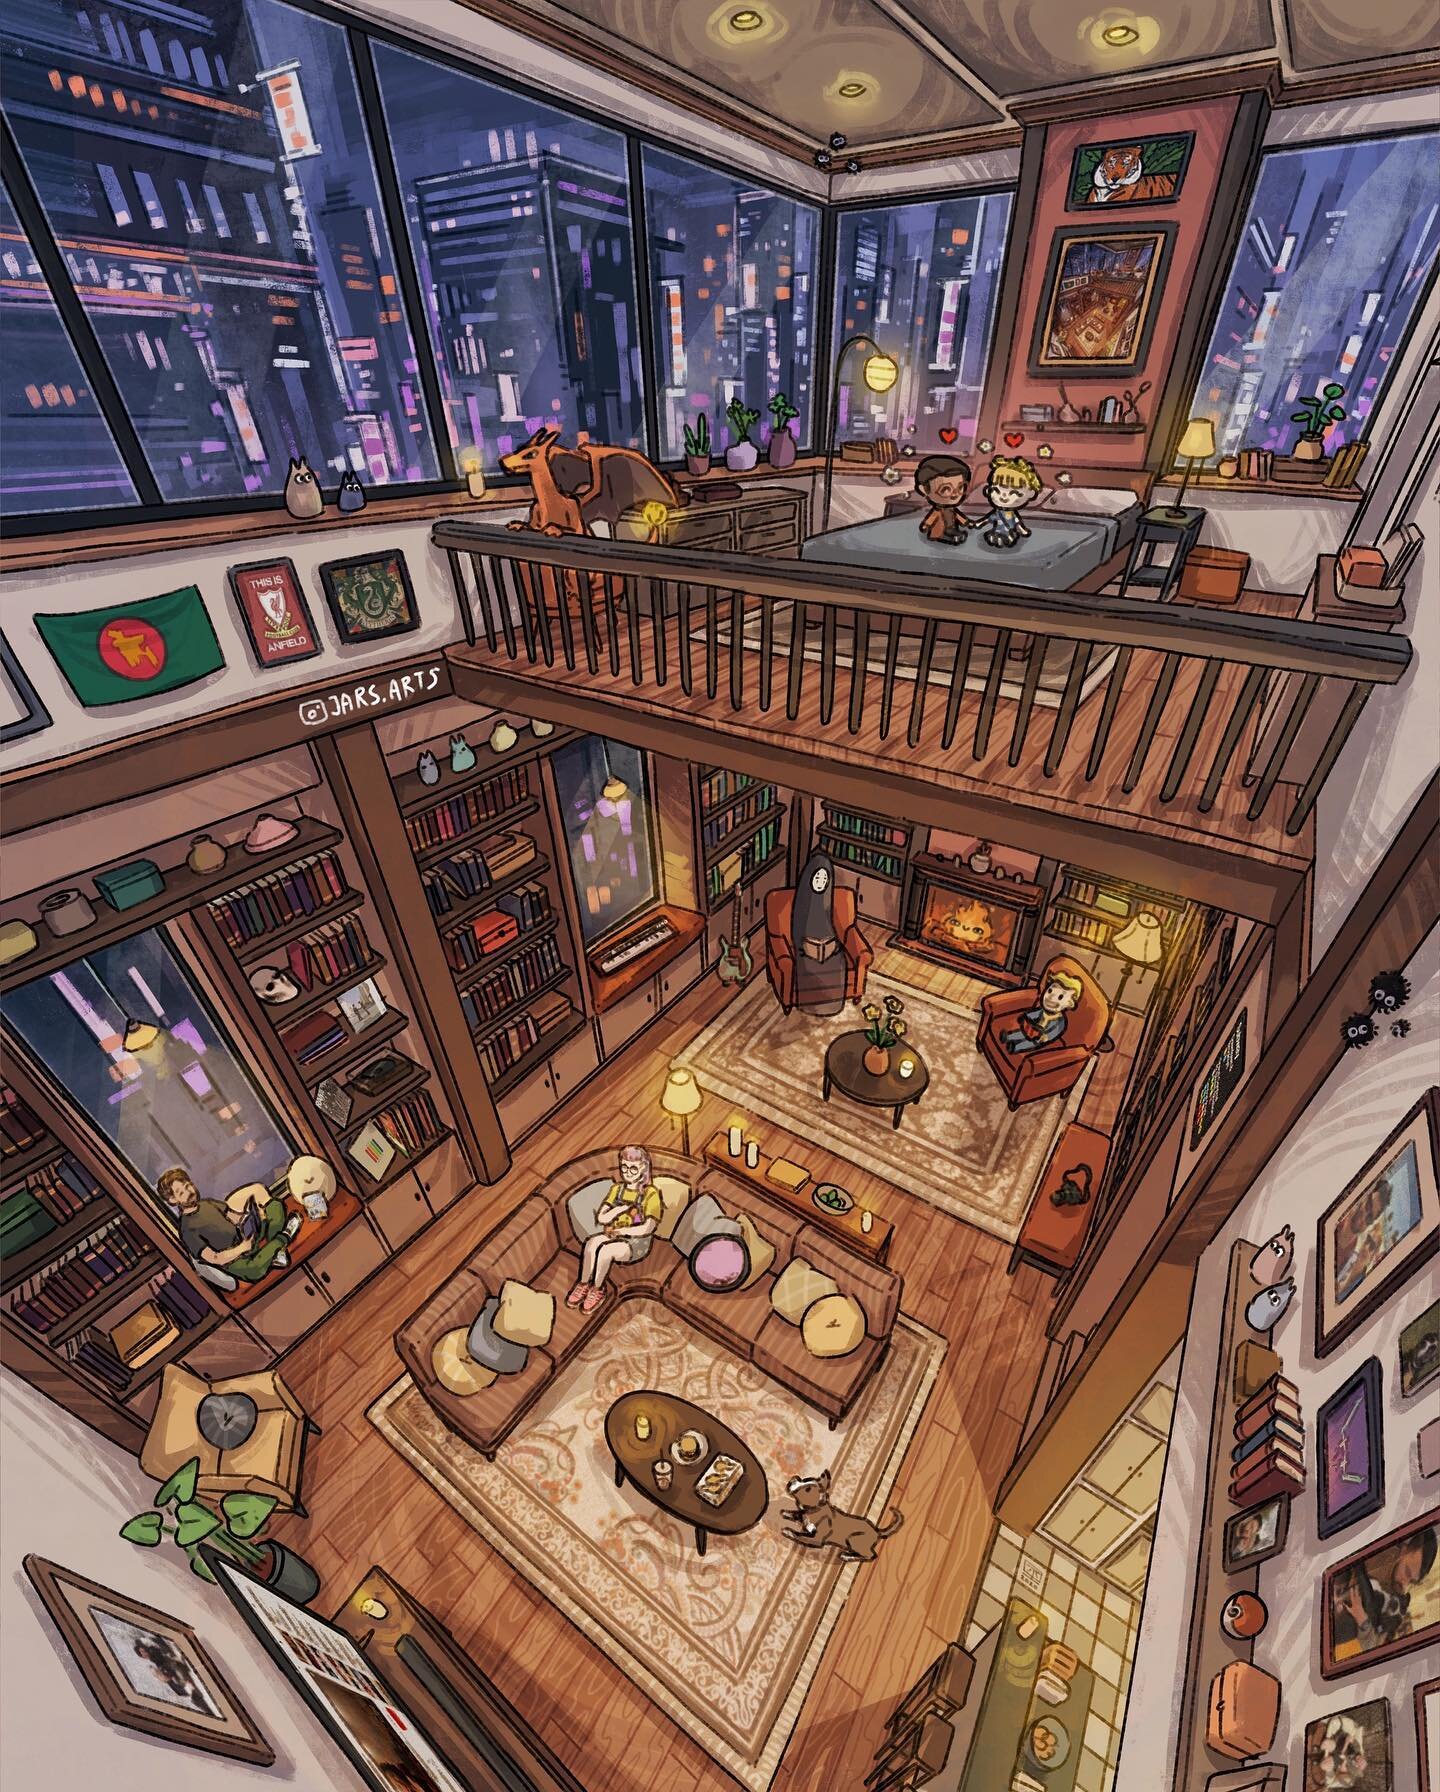 Cyberpunk Library Loft, 2022 ~ More requests for characters from animal crossing, please! Had a fun challenge with this commission trying to complement the neon city with the cozy interior and I&rsquo;m quite pleased with how it turned out. Question: